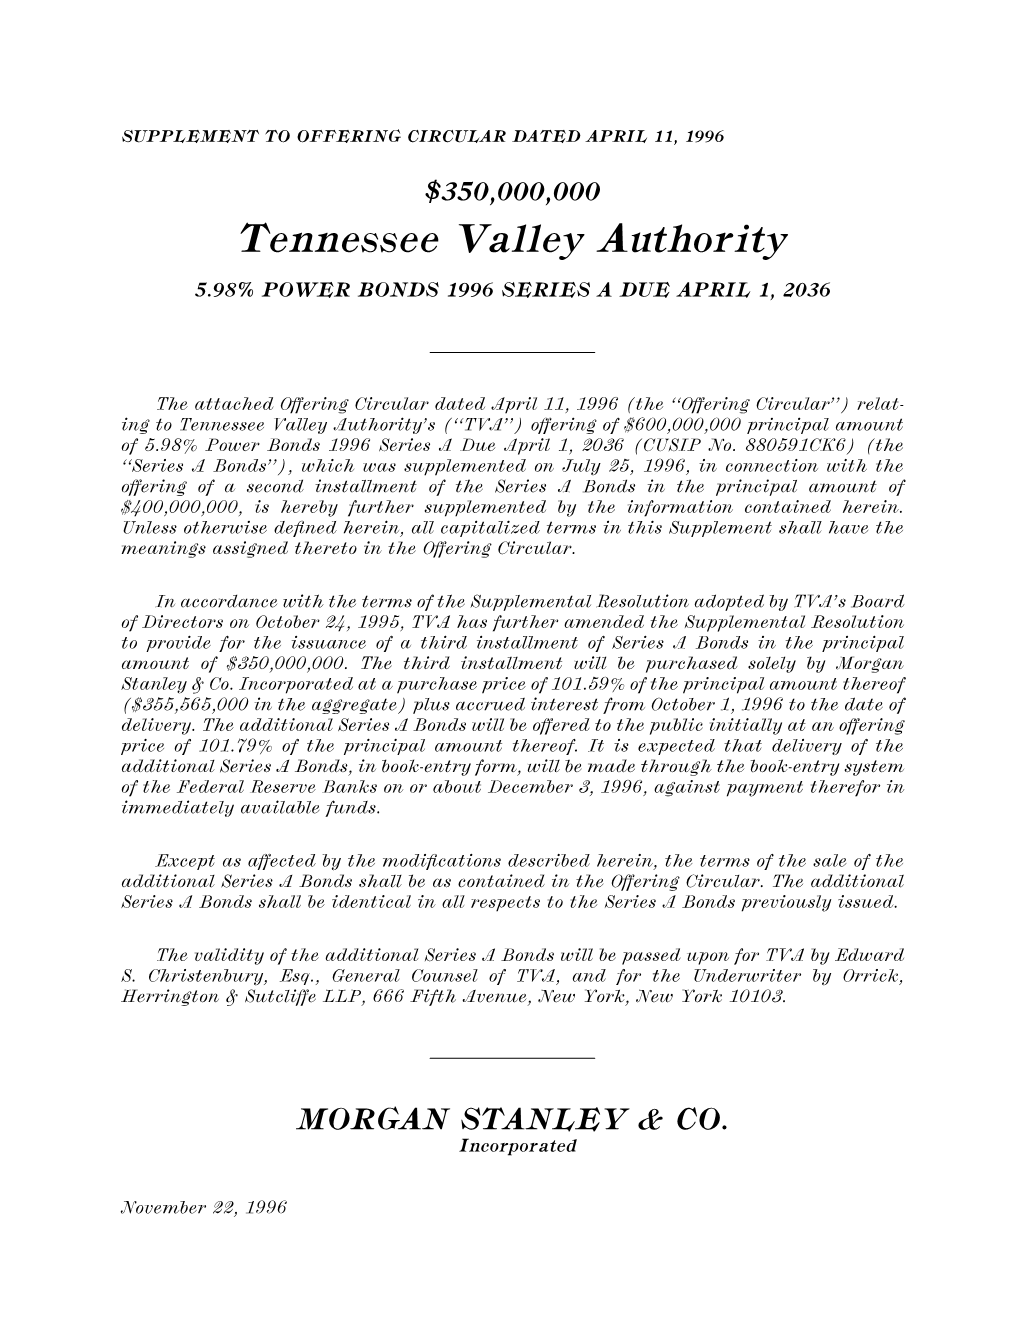 Tennessee Valley Authority 5.98% POWER BONDS 1996 SERIES a DUE APRIL 1, 2036